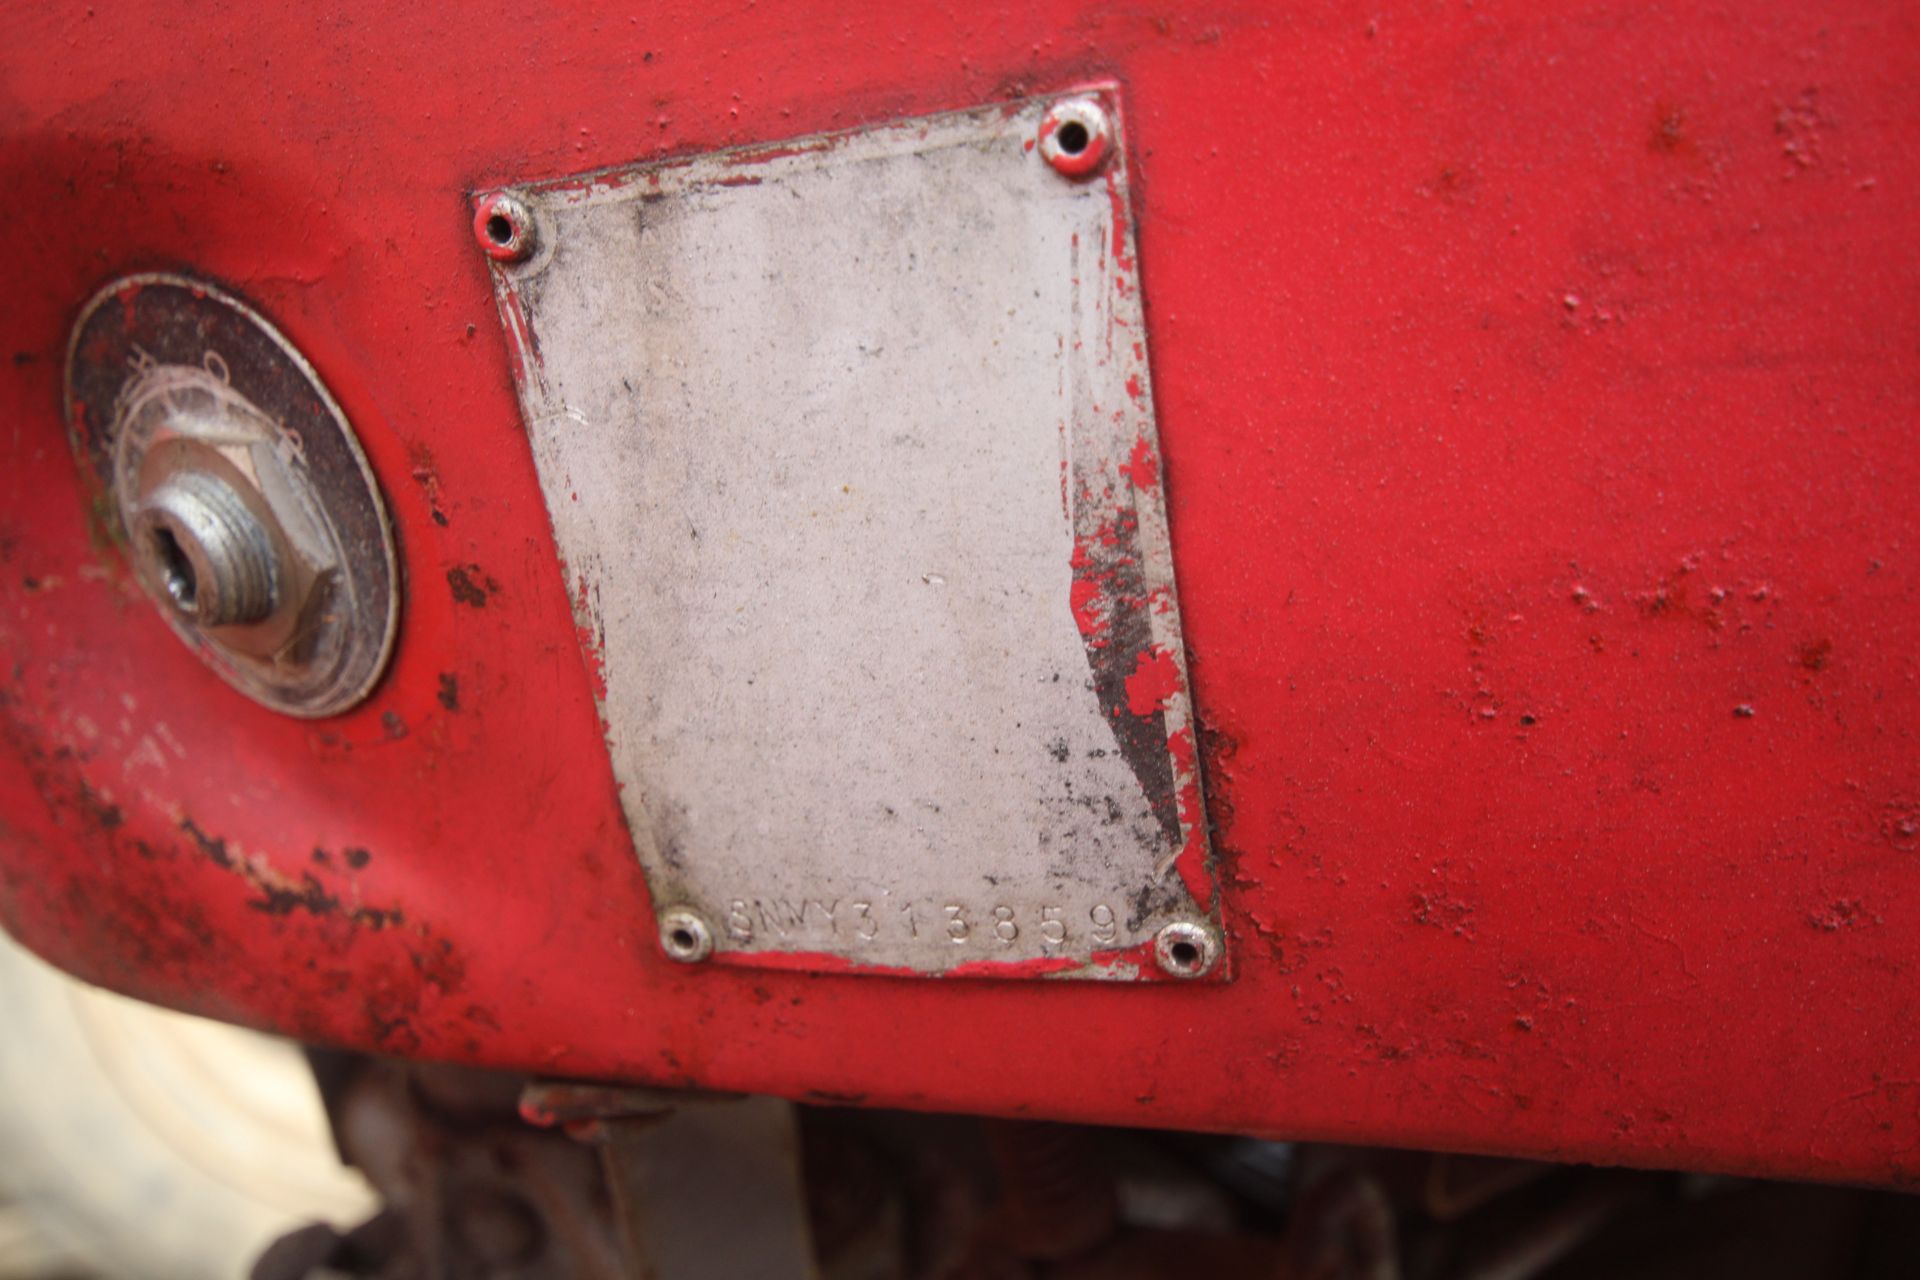 Massey Ferguson 35X 2WD tractor. 1963. Serial number SNMY313859. 11-28 rear wheels and tyres. - Image 41 of 43